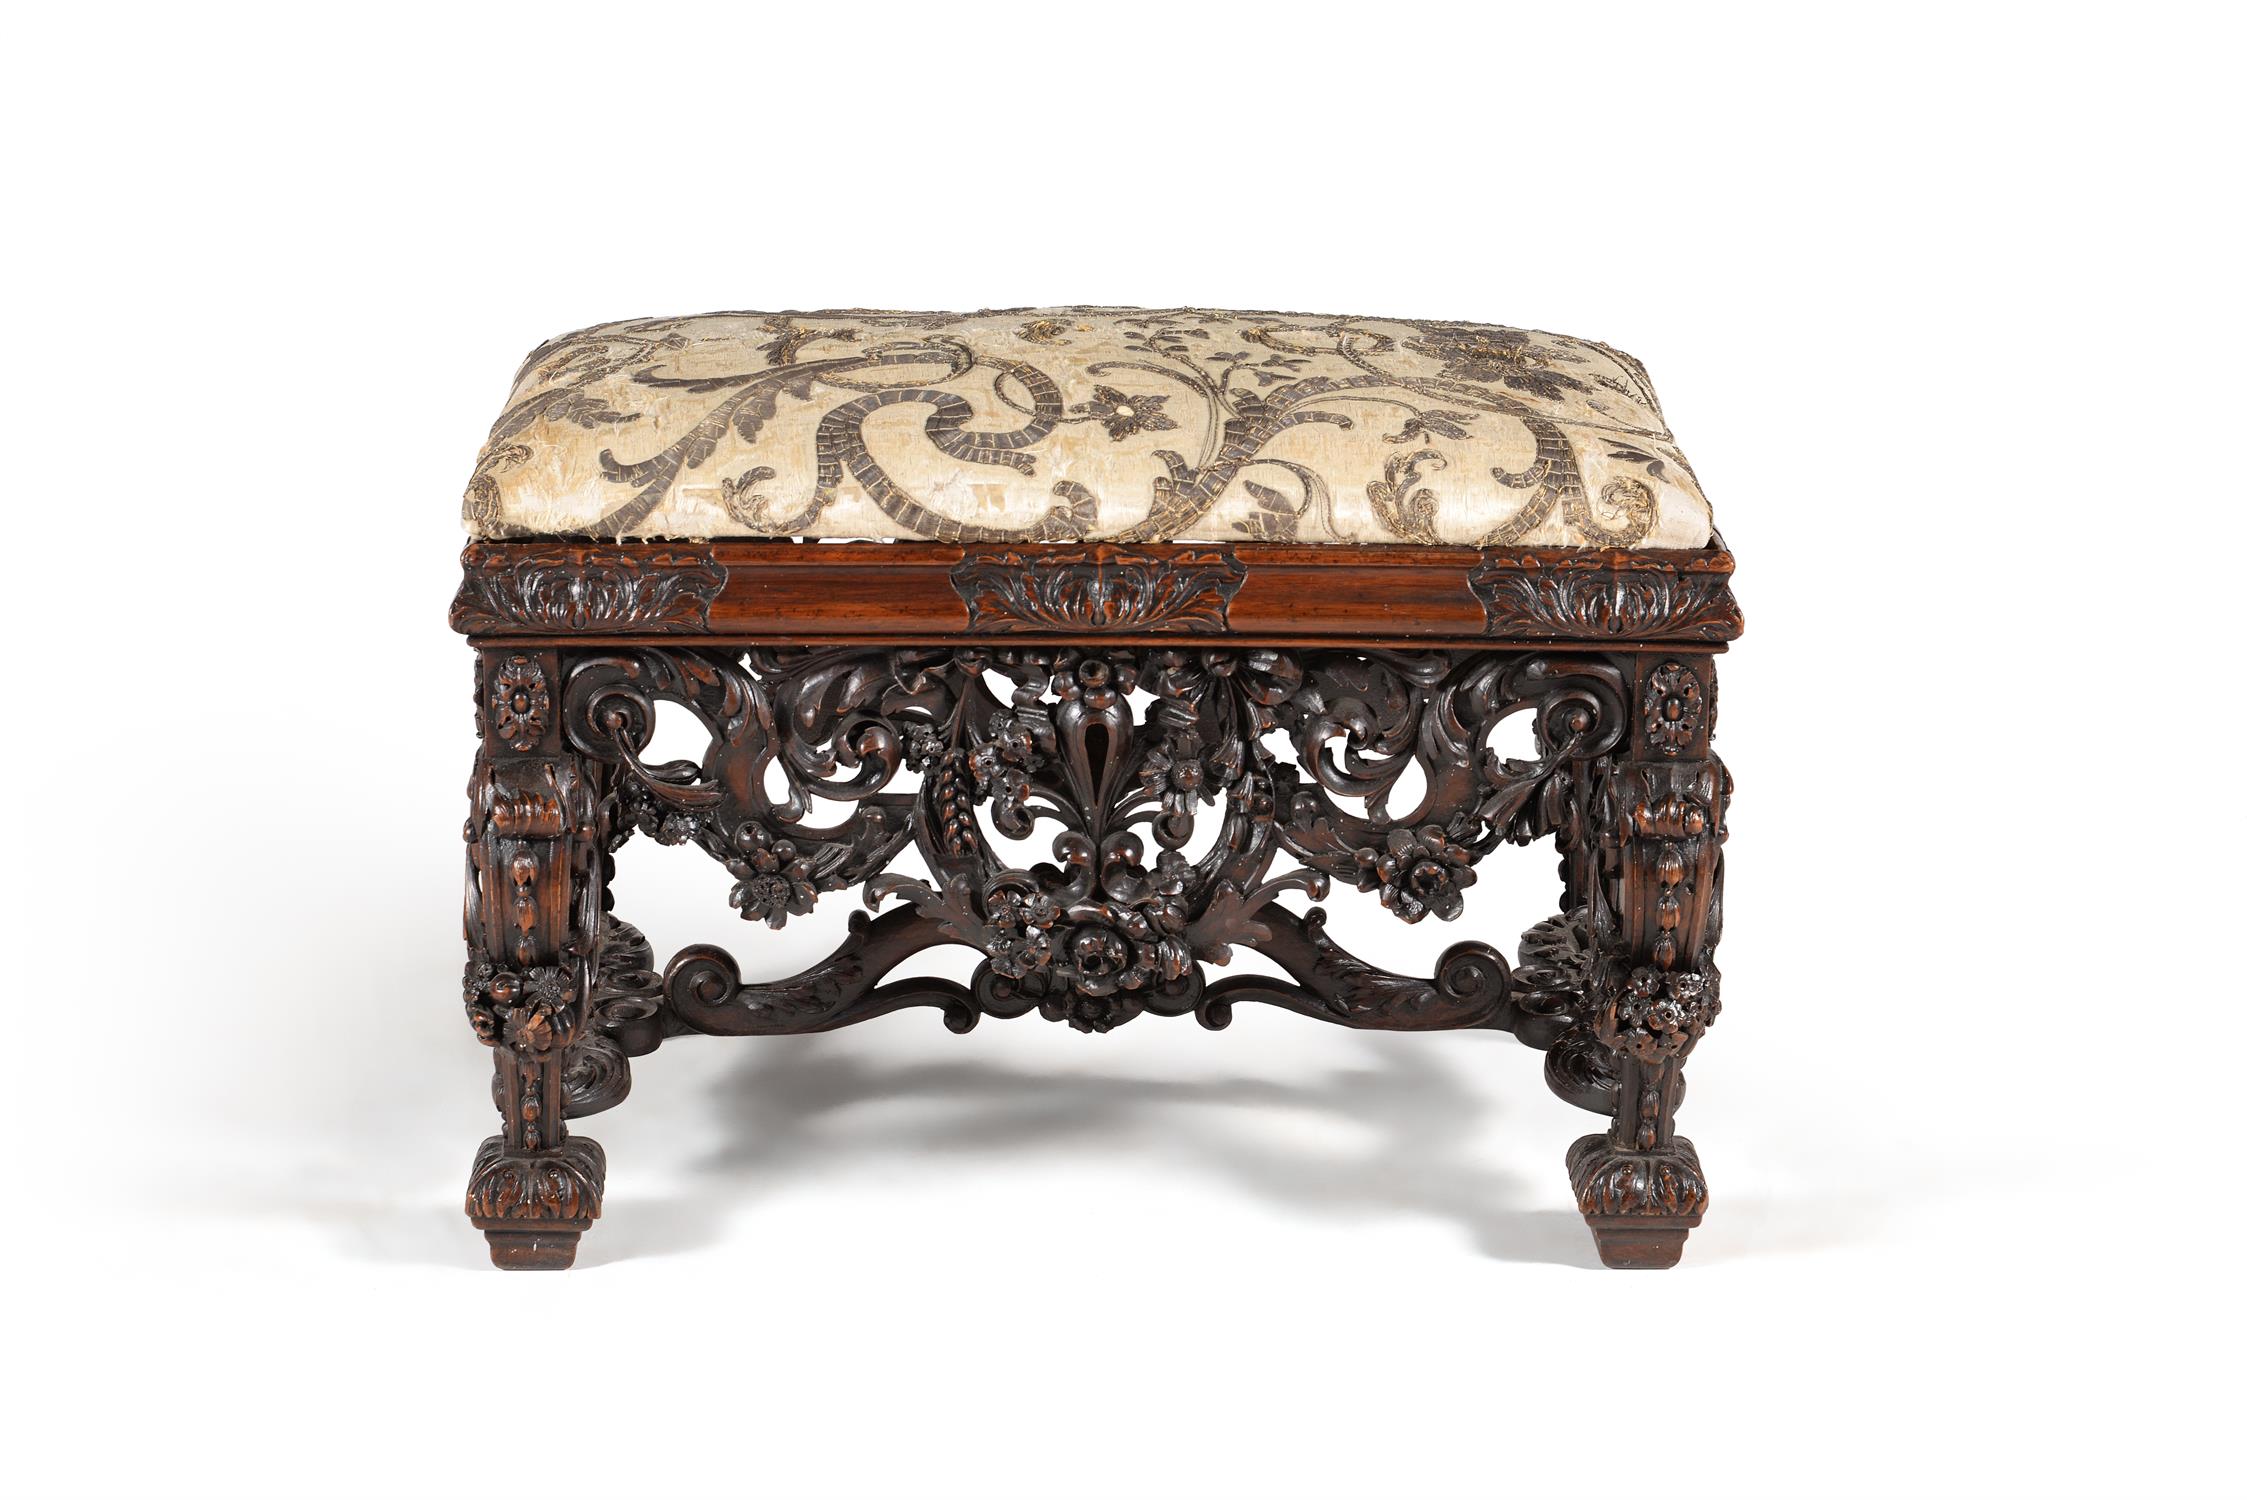 A carved walnut stool, in late 17th century style, in the manner of designs by Daniel Marot